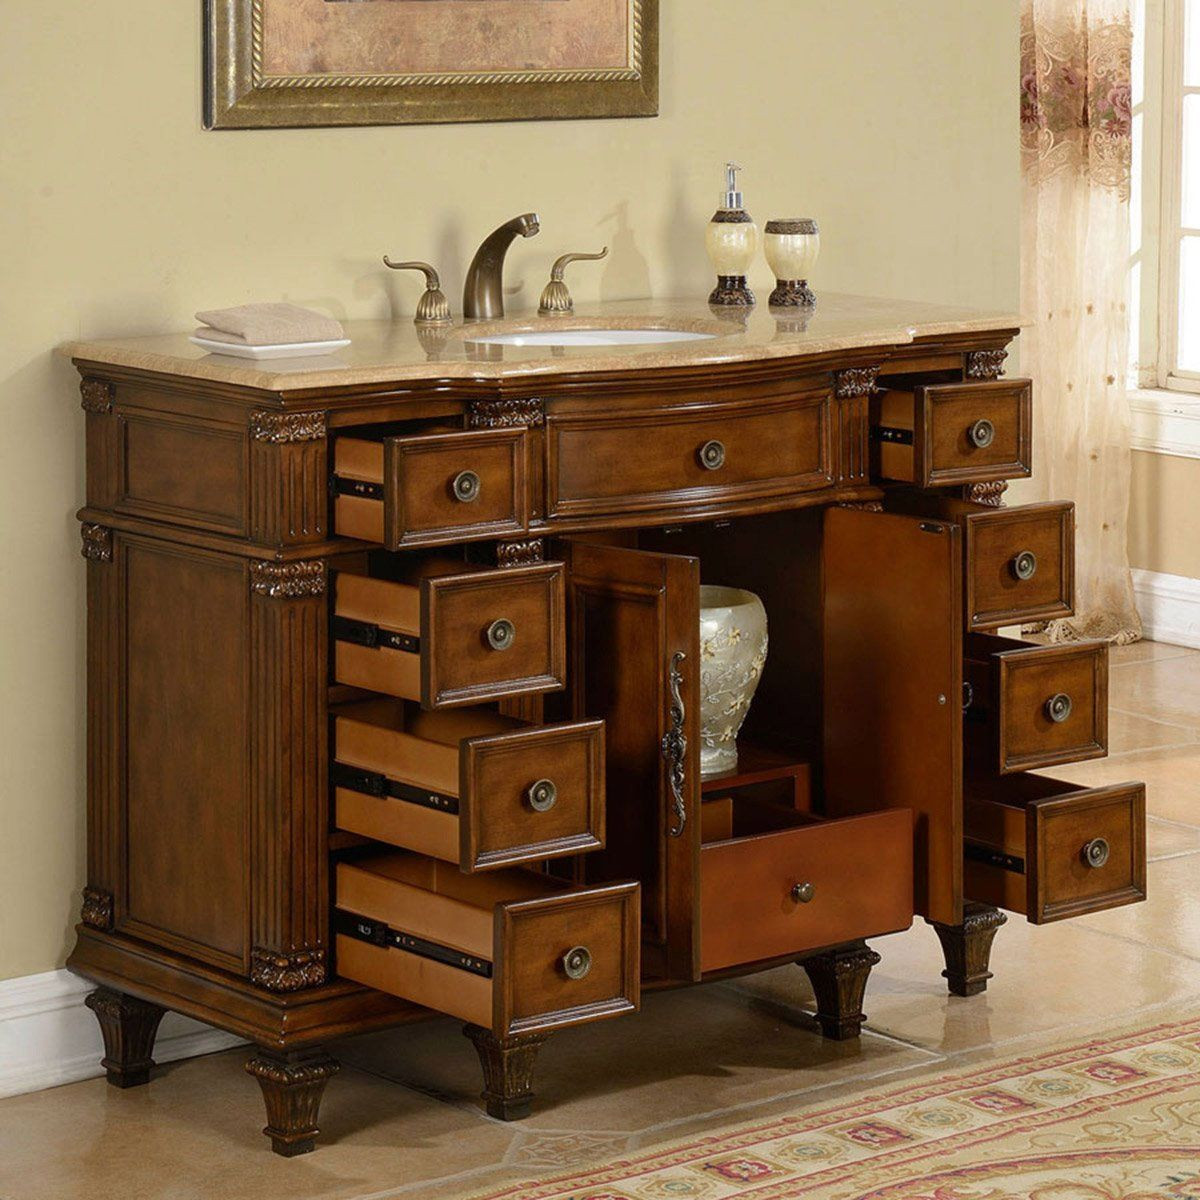 Bathroom Vanity Cabinets With Tops
 48" Transitional Single Bathroom Vanity Cherry with